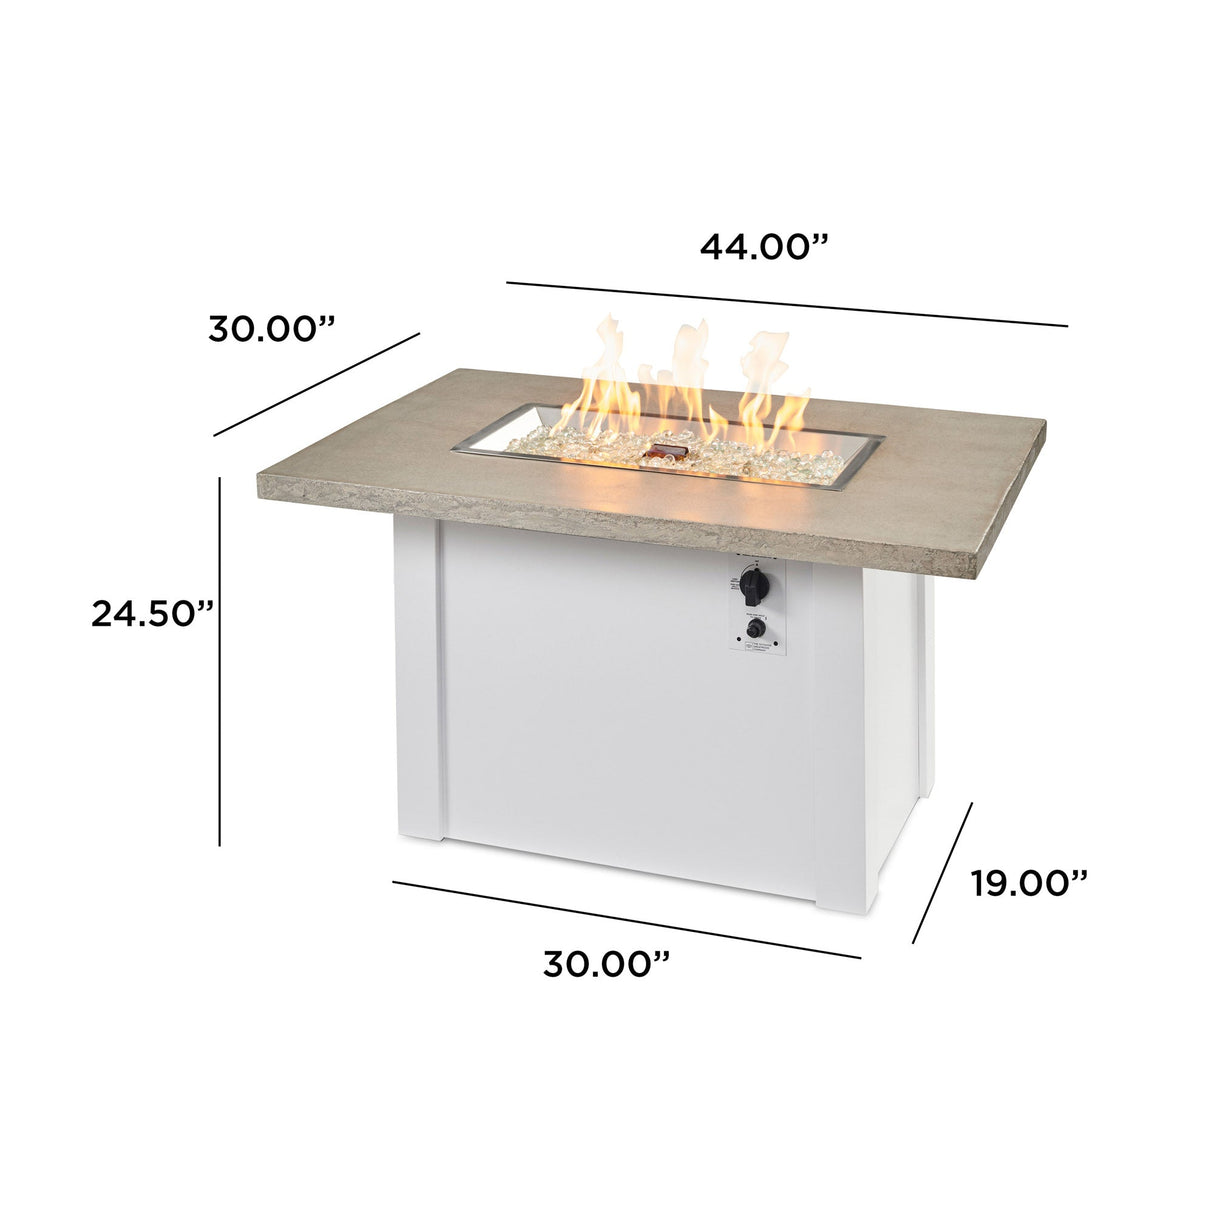 Dimensions overlaid on the Havenwood Rectangular Gas Fire Table with a Pebble Grey top and White base